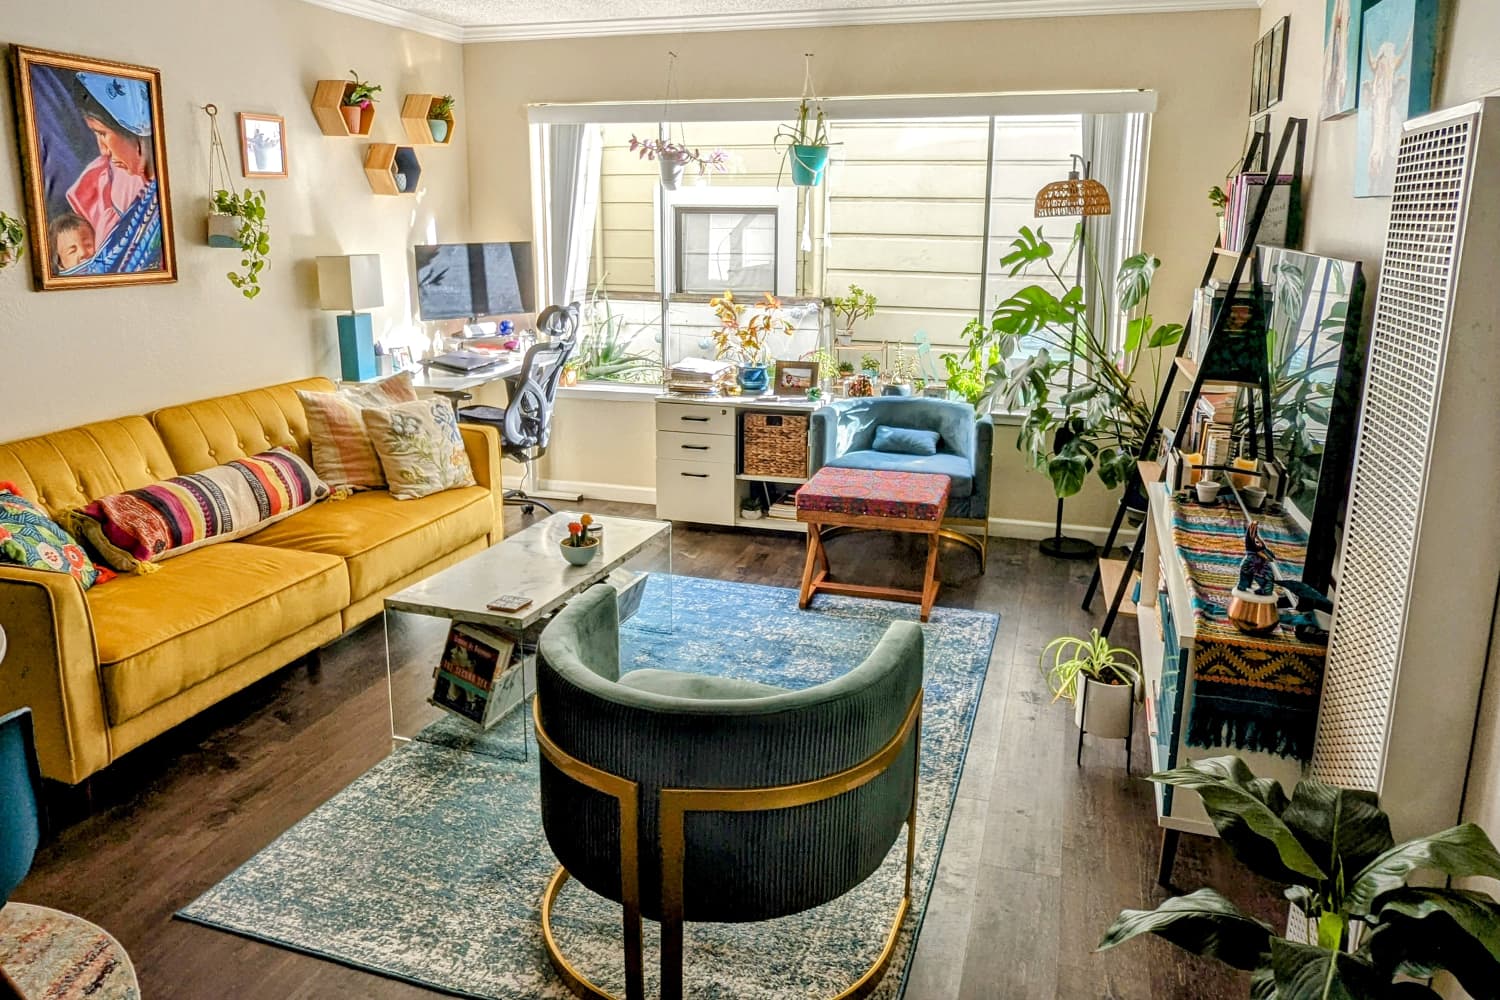 Tour a Small, Eclectic, and Vibrant San Francisco Rental Apartment